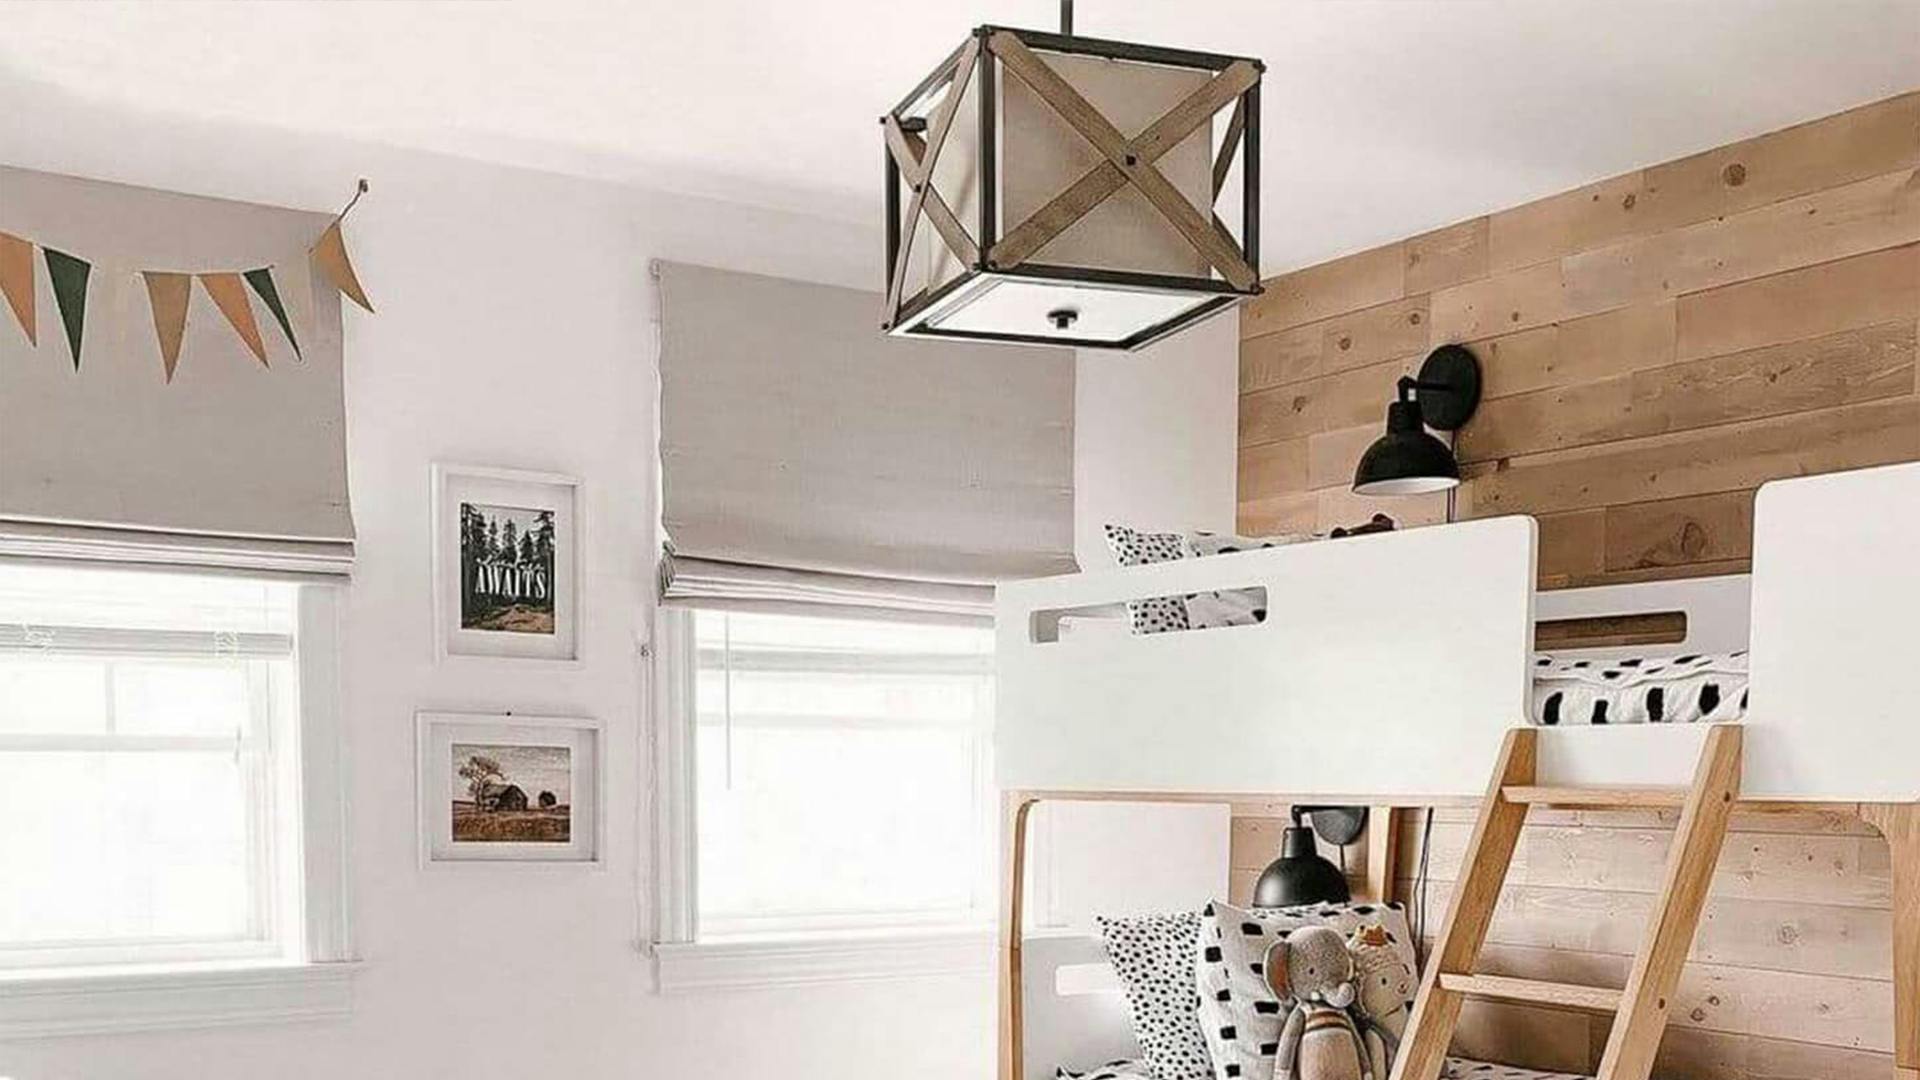 Child's bedroom with square semi flush light and bunkbeds